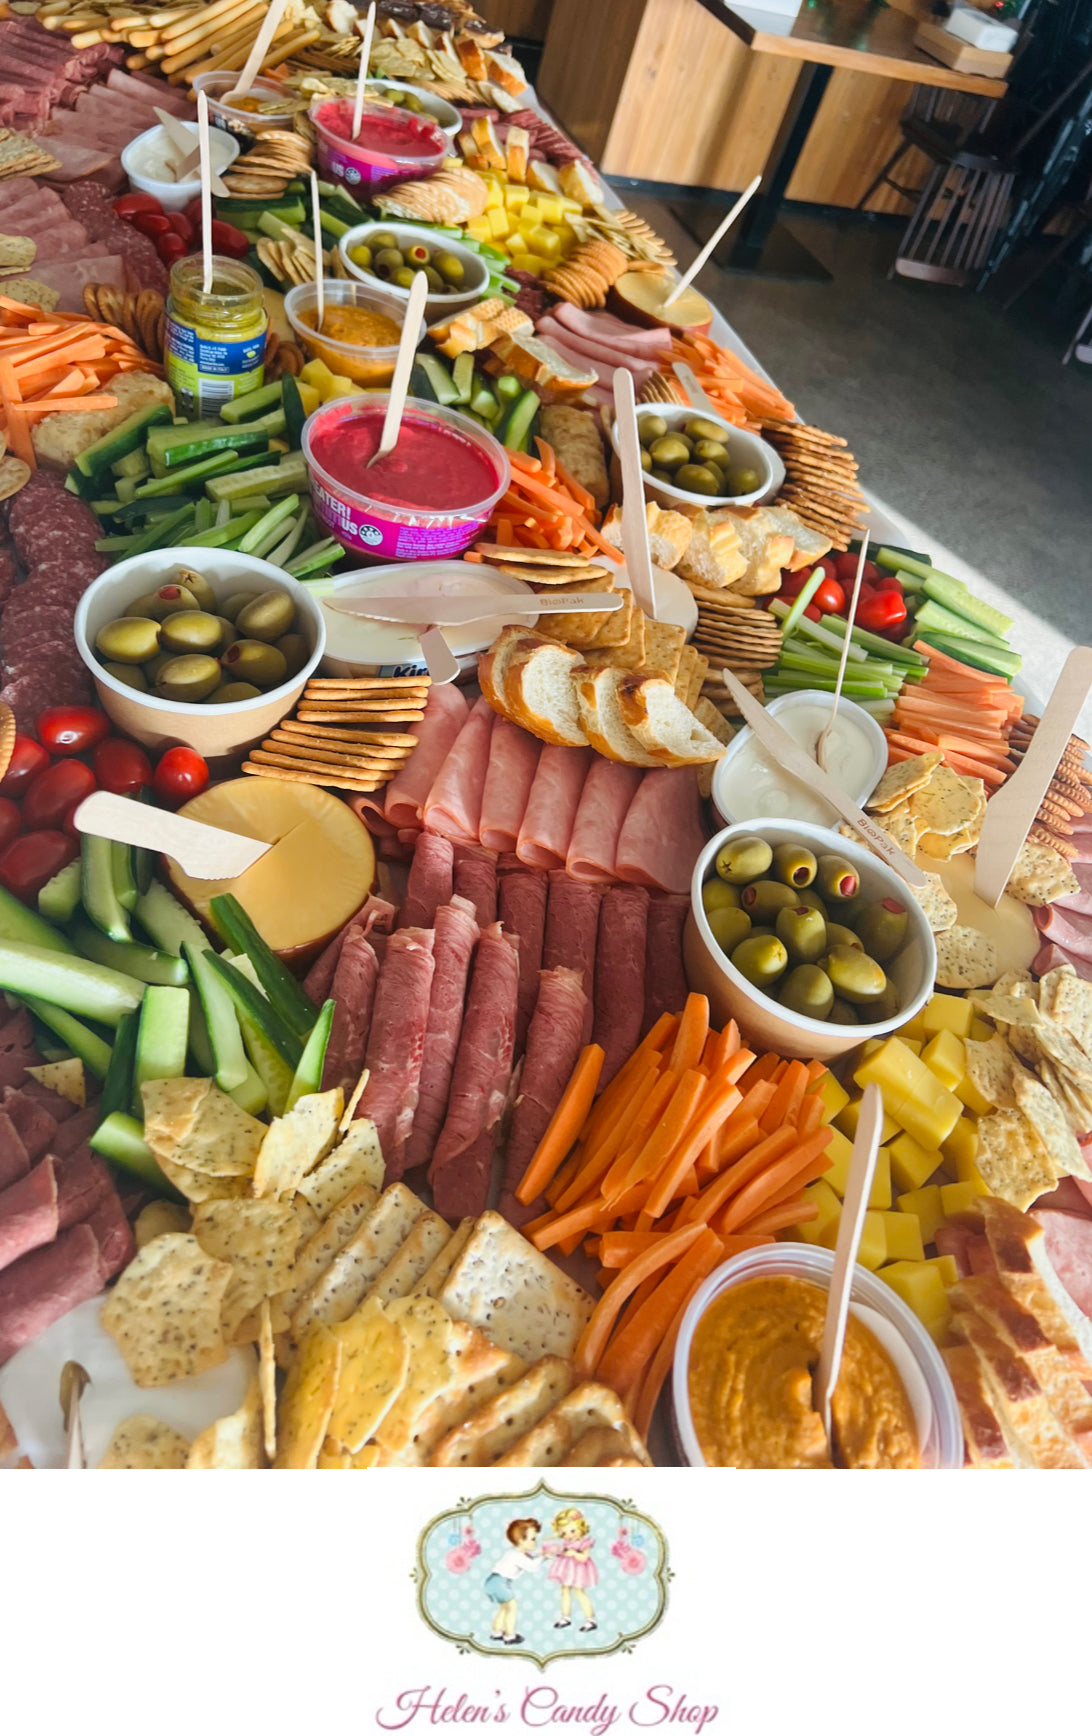 Customized grazing tables & customized catering platters